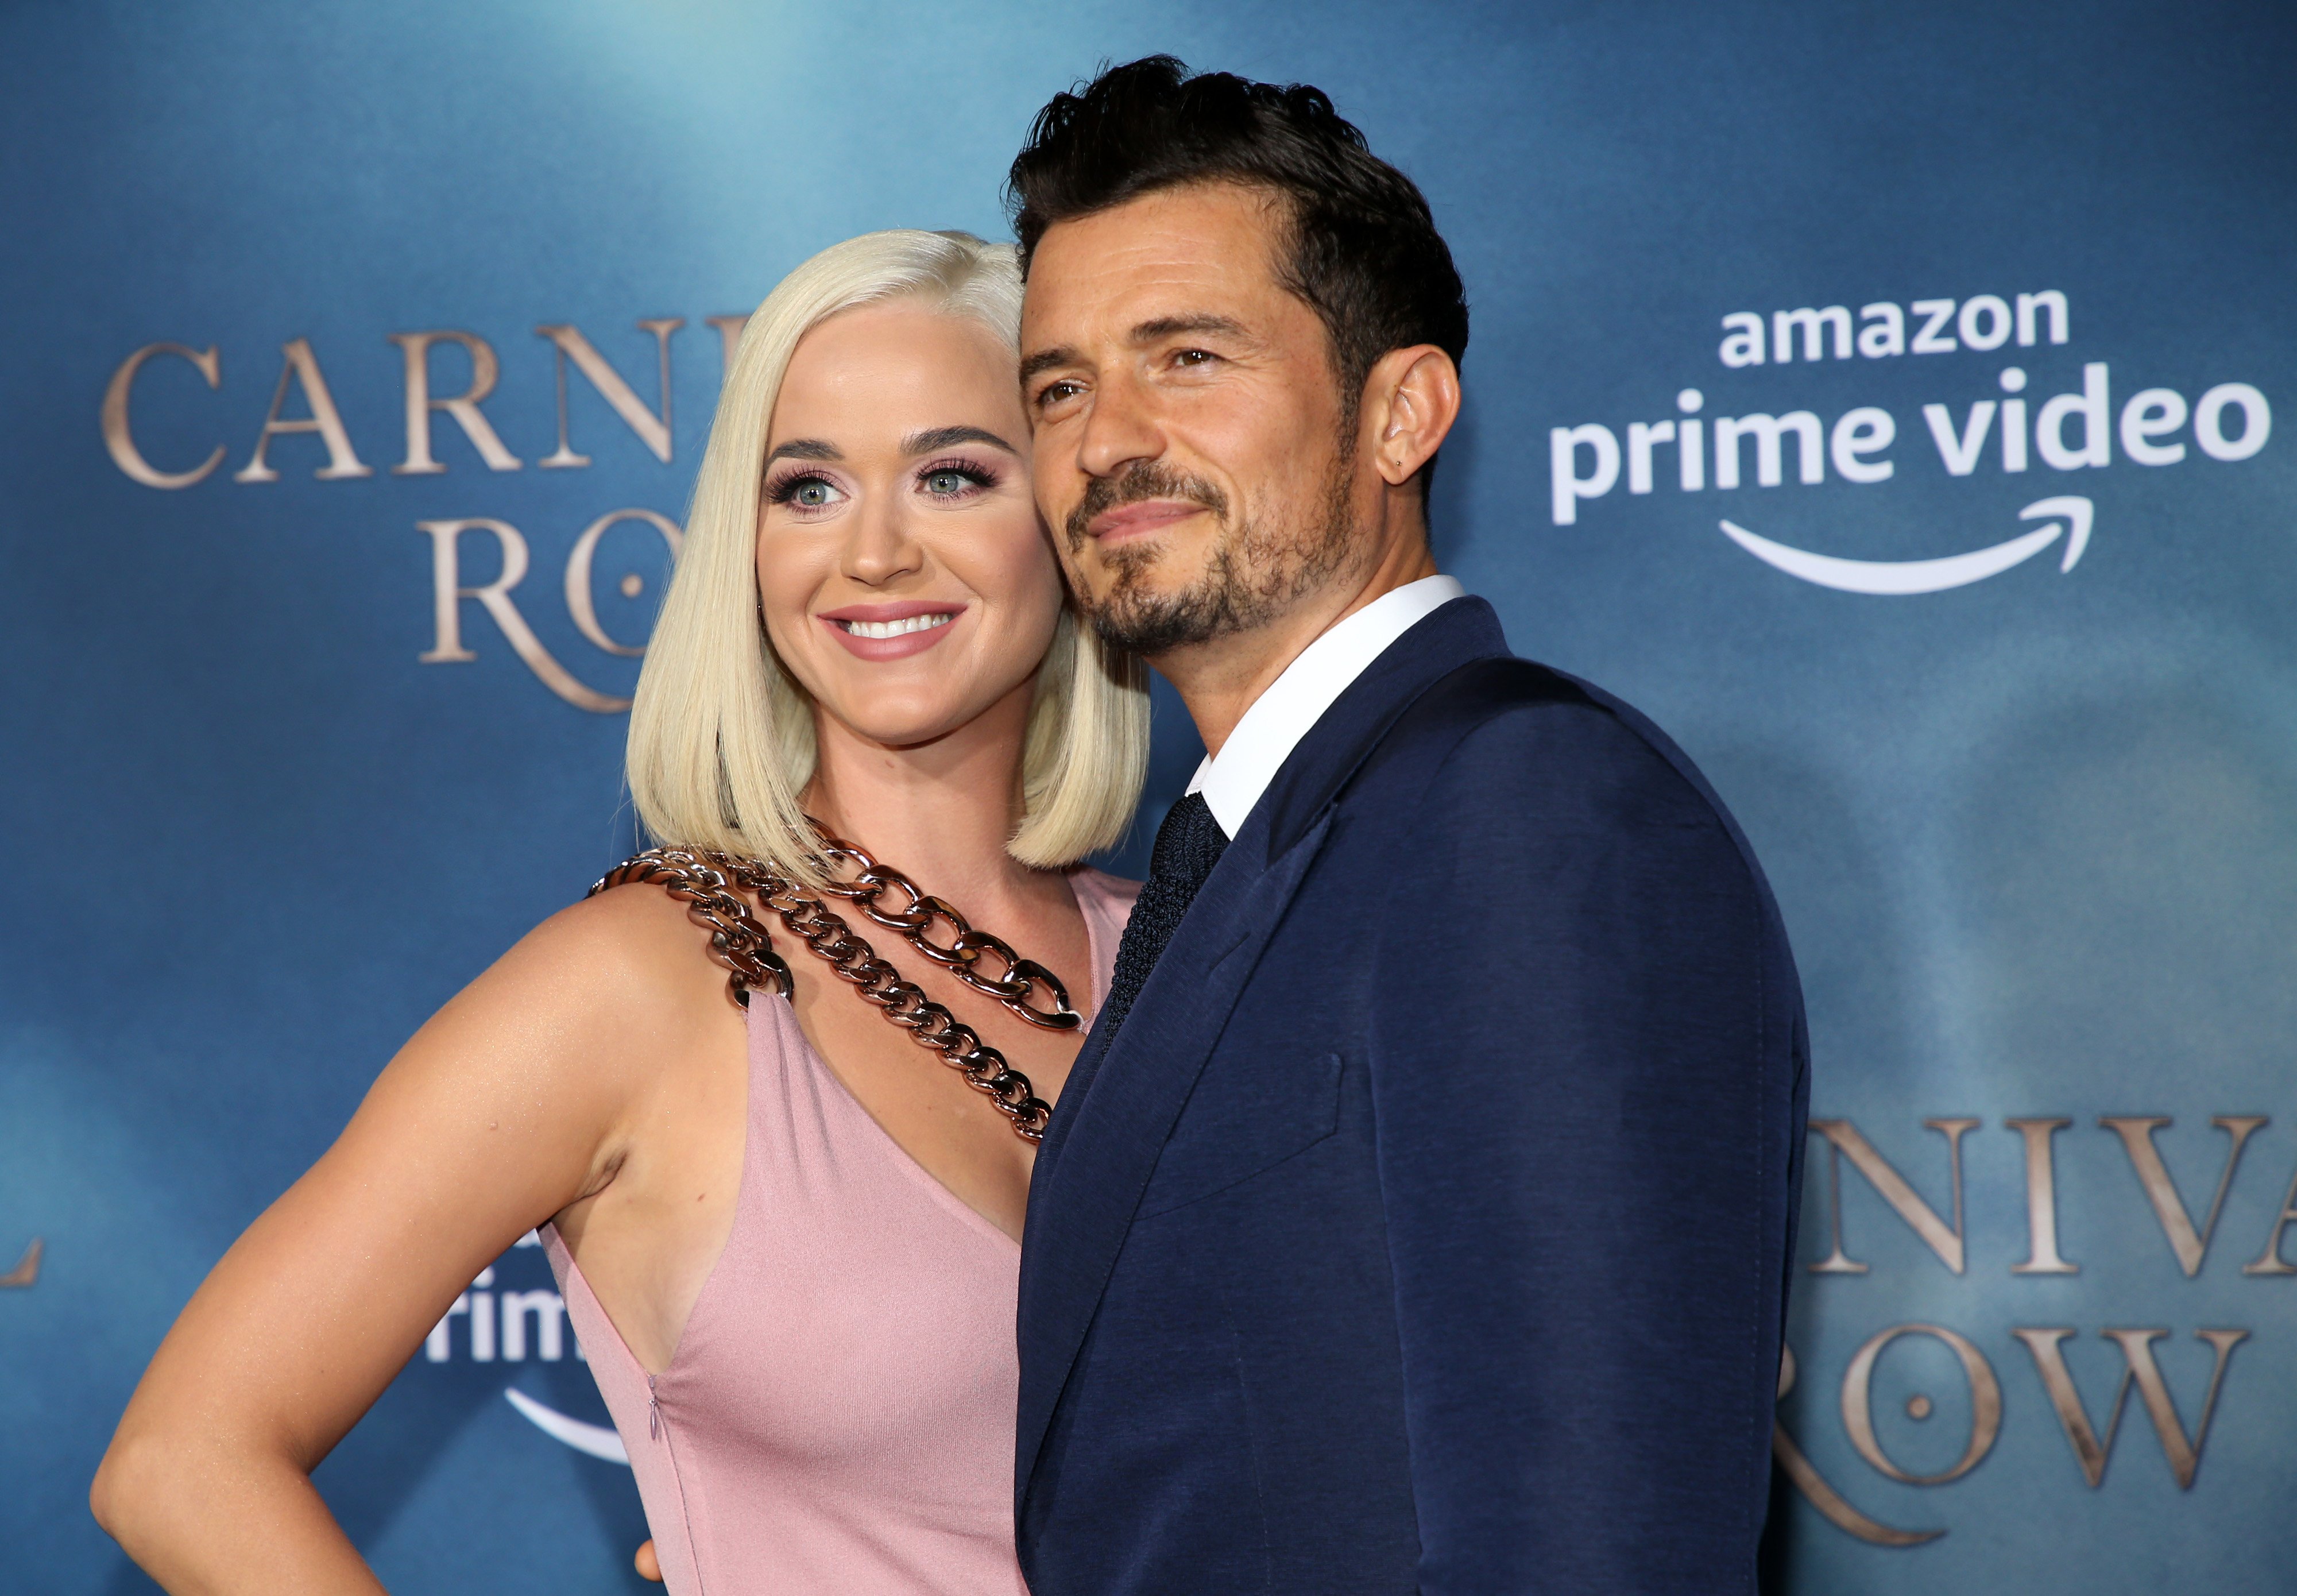 Katy Perry and Orlando Bloom pictured at the LA premiere of Amazon's "Carnival Row," 2019, Hollywood, California. | Photo: Getty Images